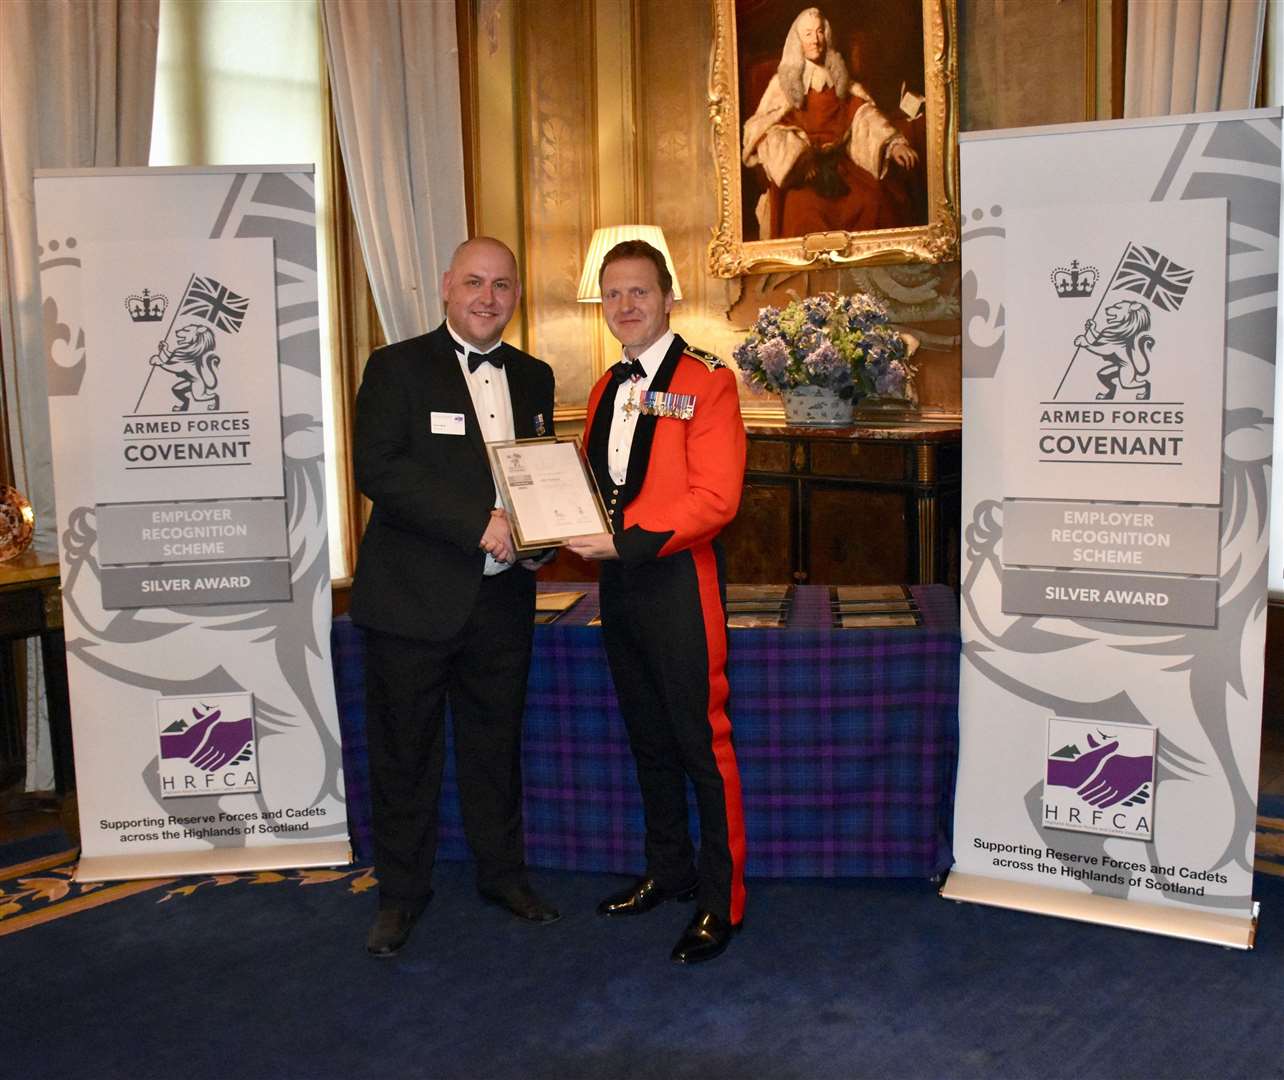 Shaun (left) with Major-General William Stewart Codrington Wright CBE at the Armed Forces Covenant award ceremony, Scone Palace, Perth.